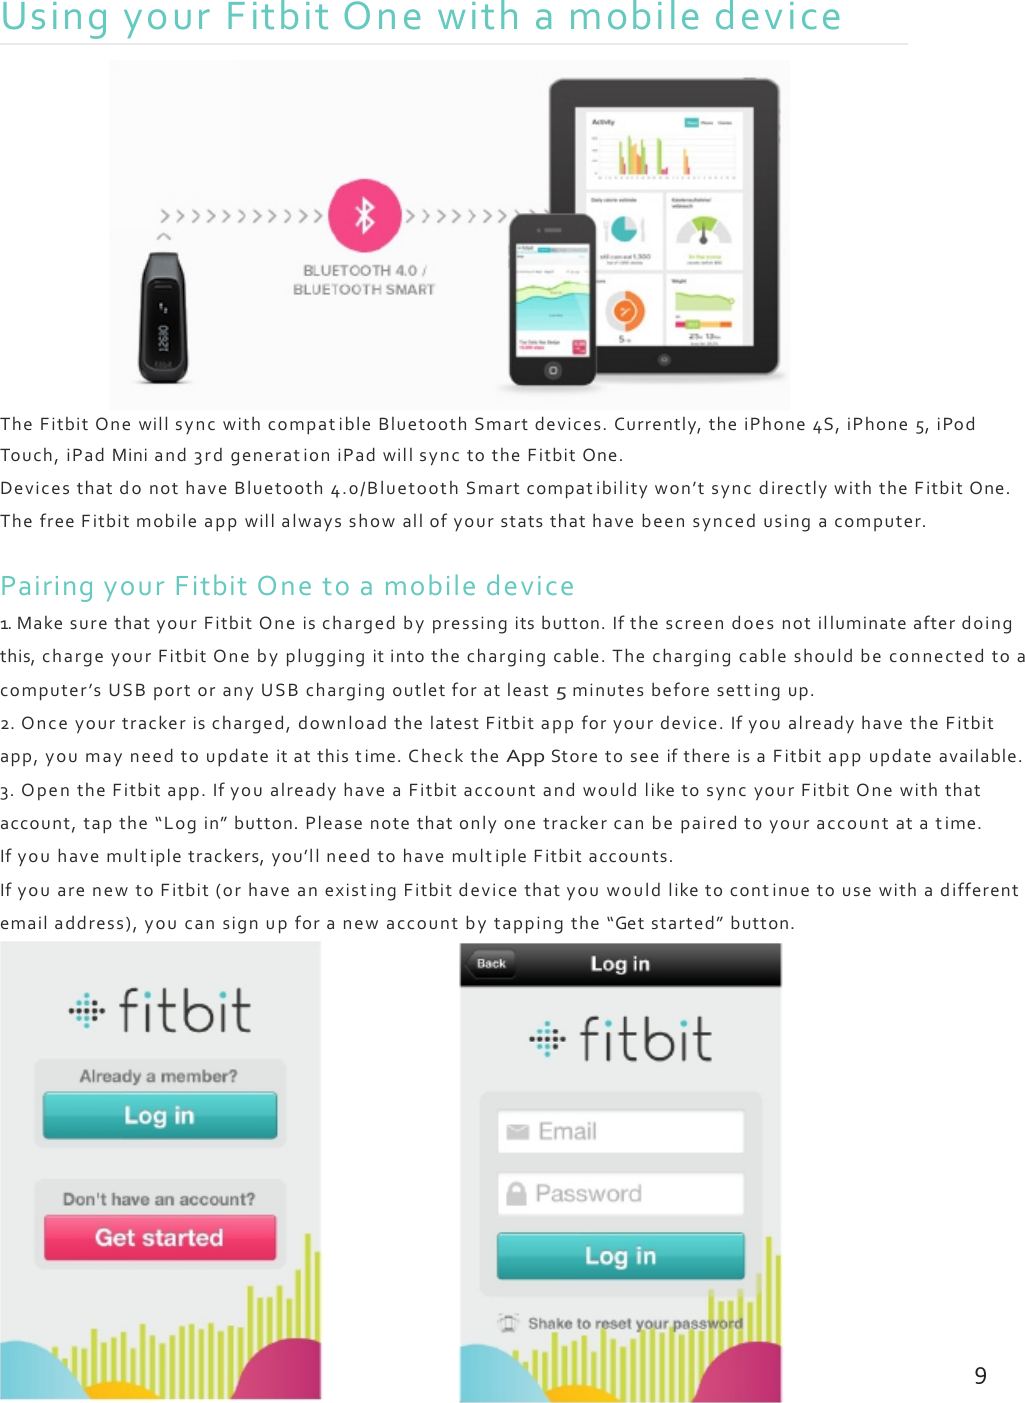 UsingyourFitbitOnewithamobiledeviceTheFitbitOnewillsyncwithcompatibleBluetoothSmartdevices.Currently,theiPhone4S,iPhone5,iPodTouch,iPadMiniand3rdgenerationiPadwillsynctotheFitbitOne.DevicesthatdonothaveBluetooth4.0/BluetoothSmartcompatibilitywon’tsyncdirectlywiththeFitbitOne.ThefreeFitbitmobileappwillalwaysshowallofyourstatsthathavebeensyncedusingacomputer.PairingyourFitbitOnetoamobiledevice1.MakesurethatyourFitbitOneischargedbypressingitsbutton.Ifthescreendoesnotilluminateafterdoingthis,chargeyourFitbitOnebypluggingitintothechargingcable.Thechargingcableshouldbeconnectedtoacomputer’sUSBportoranyUSBchargingoutletforatleast5minutesbeforesettingup.2.Onceyourtrackerischarged,downloadthelatestFitbitappforyourdevice.IfyoualreadyhavetheFitbitapp,youmayneedtoupdateitatthistime.ChecktheAppStoretoseeifthereisaFitbitappupdateavailable.3.OpentheFitbitapp.IfyoualreadyhaveaFitbitaccountandwouldliketosyncyourFitbitOnewiththataccount,tapthe“Login”button.Pleasenotethatonlyonetrackercanbepairedtoyouraccountatatime.Ifyouhavemultipletrackers,you’llneedtohavemultipleFitbitaccounts.IfyouarenewtoFitbit(orhaveanexistingFitbitdevicethatyouwouldliketocontinuetousewithadifferentemailaddress),youcansignupforanewaccountbytappingthe“Getstarted”button.9